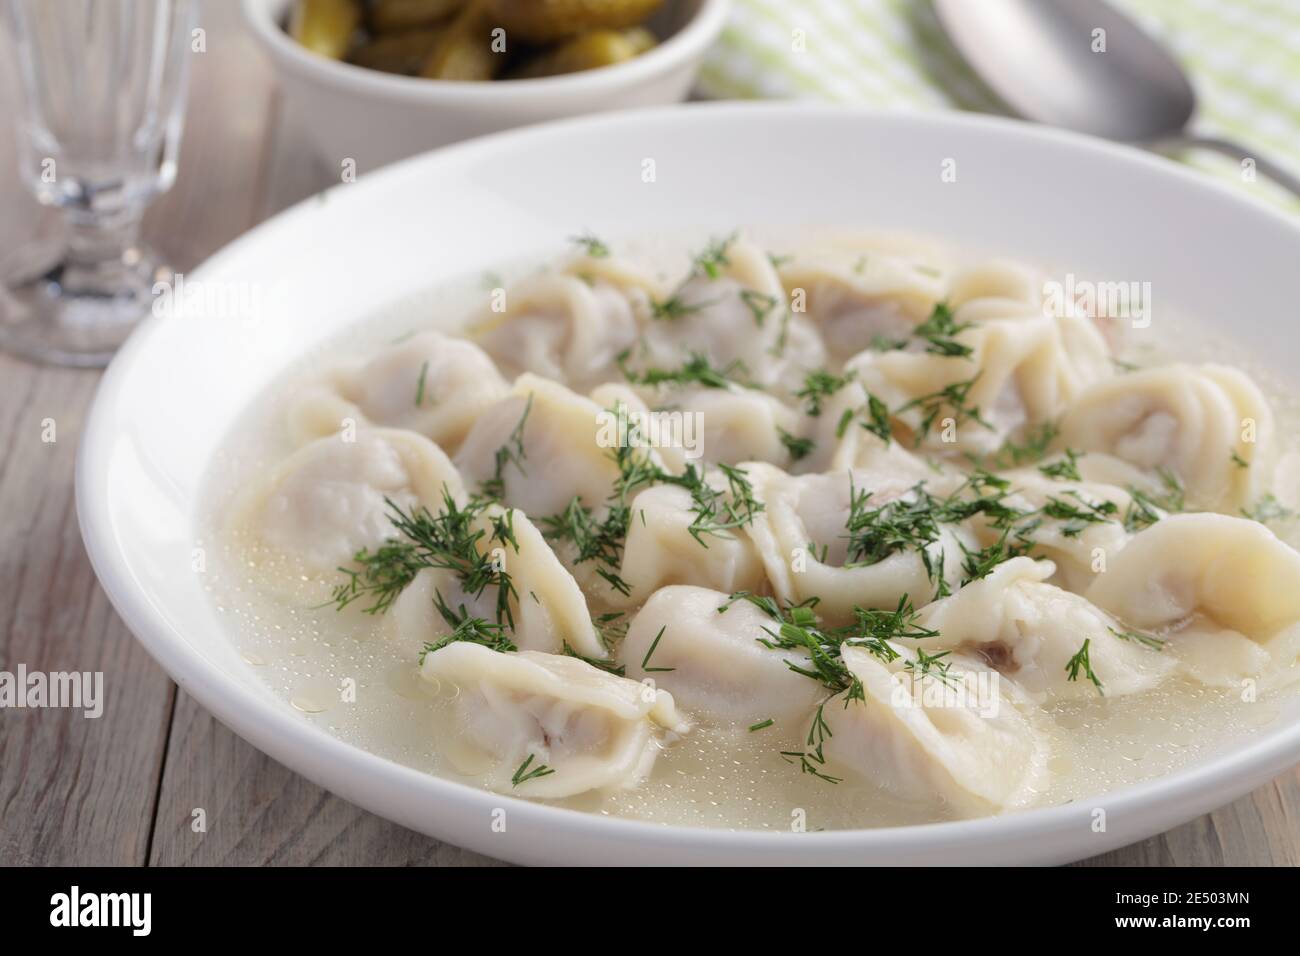 Pelmeni the traditional Russian dumplings served with broth and dill Stock Photo